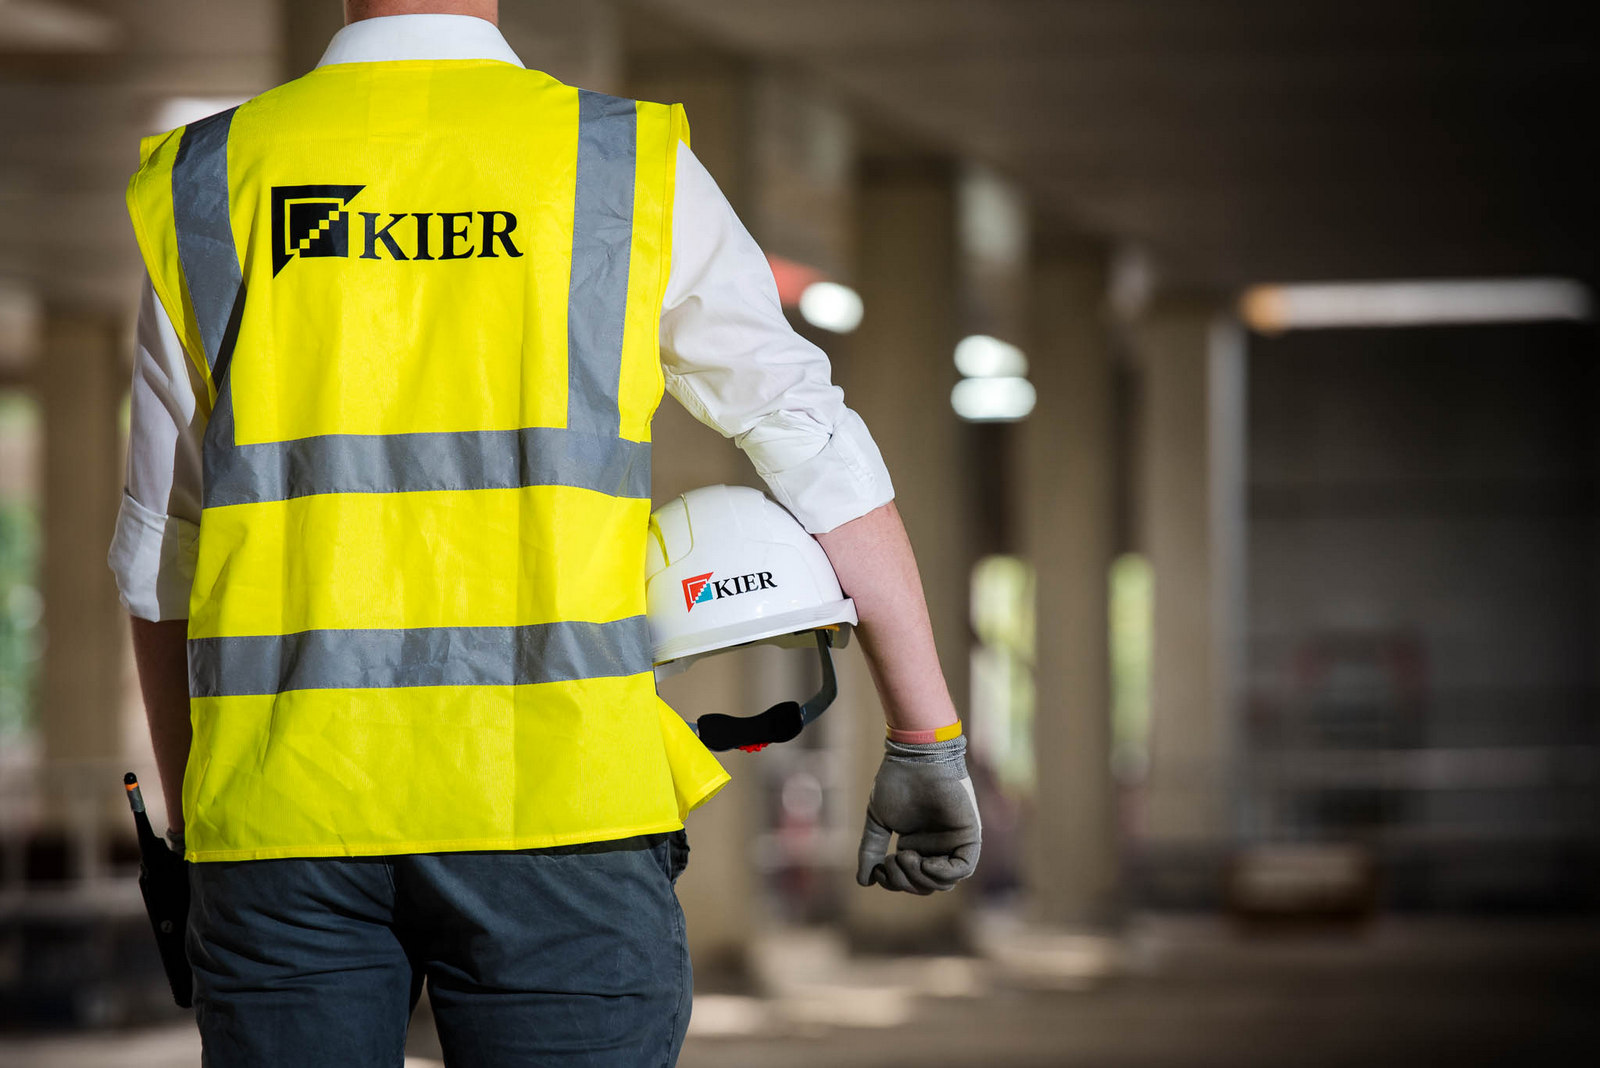 Kier tight-lipped over reported Tilbury Douglas deal